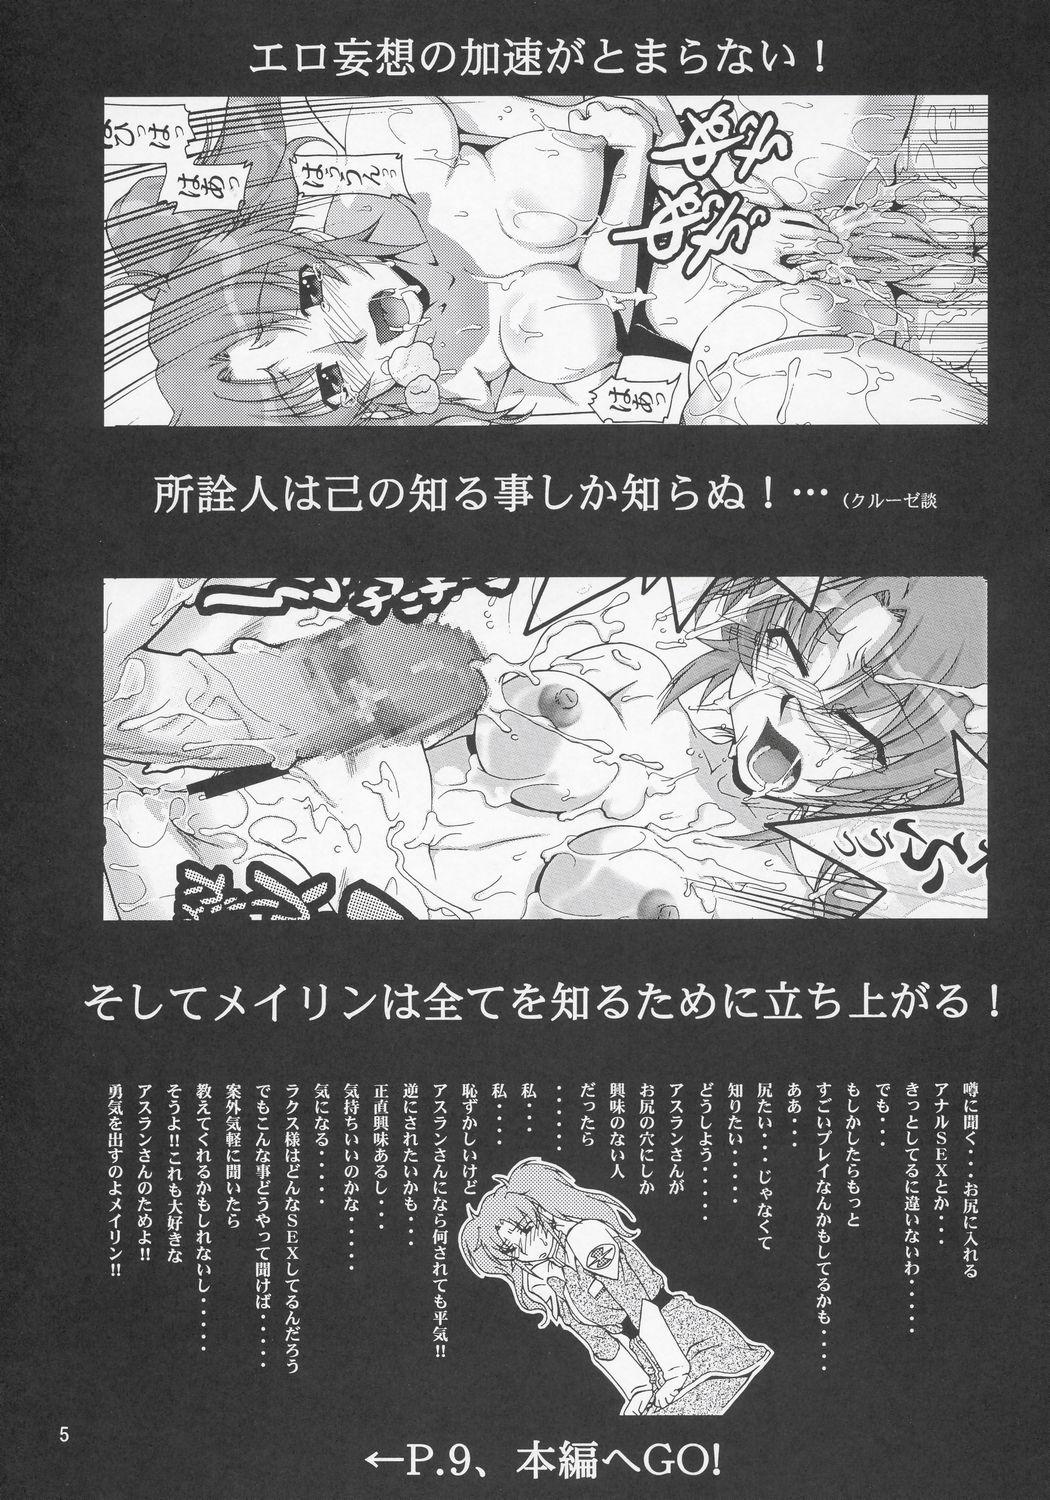 Hunk Thank You! Lacus End - Gundam seed destiny Beauty - Page 4